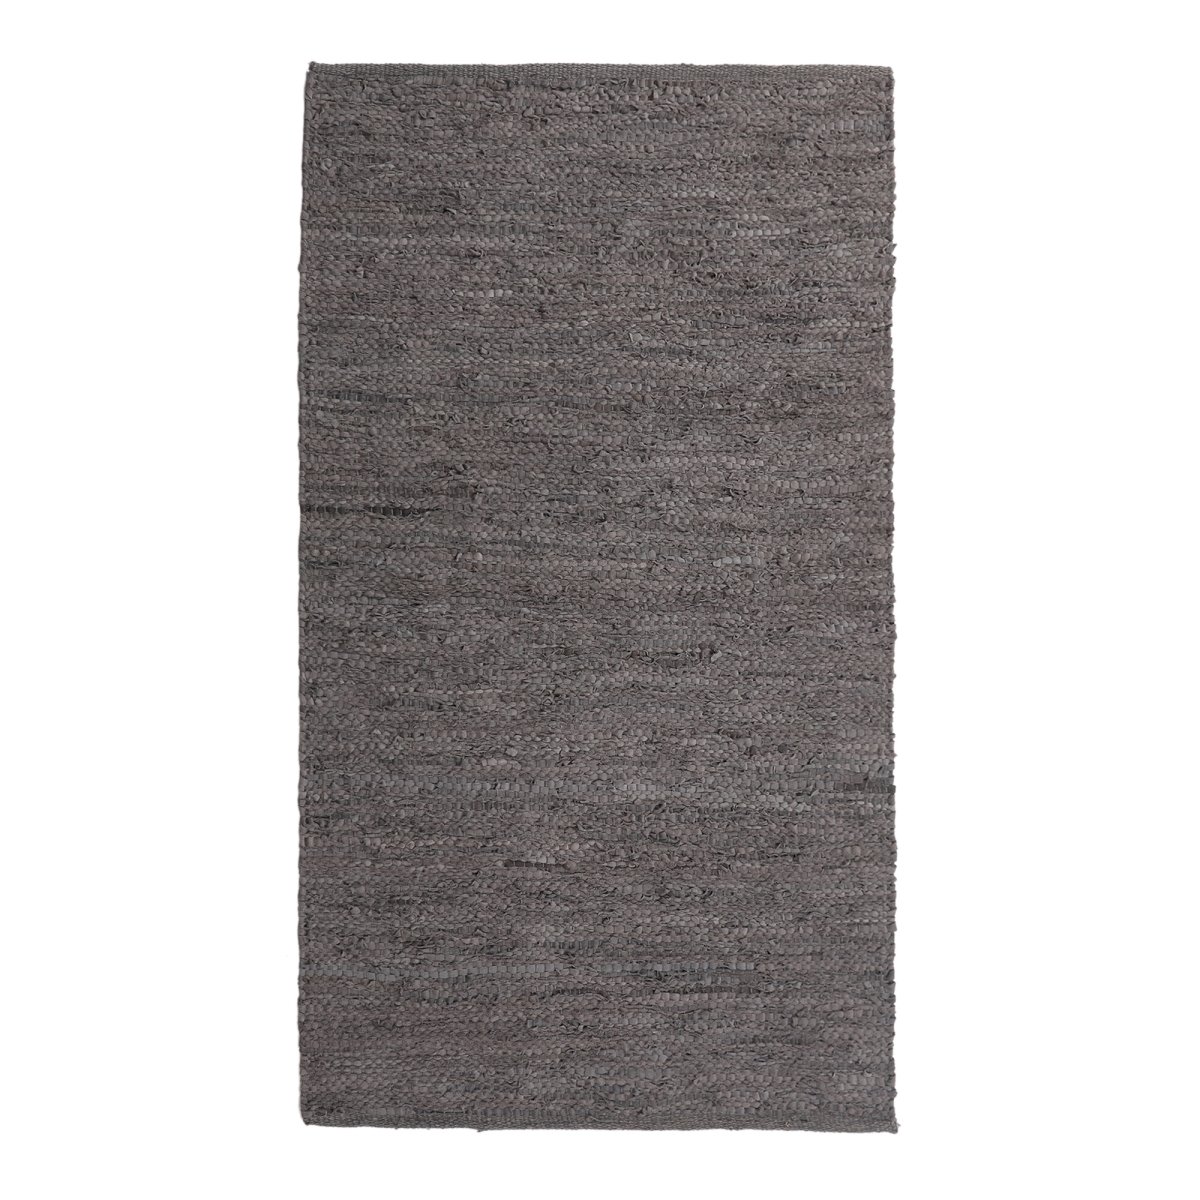 Whtxr642-l 4 X 6 Ft. Handwoven Leather & Cotton Rug, Gray